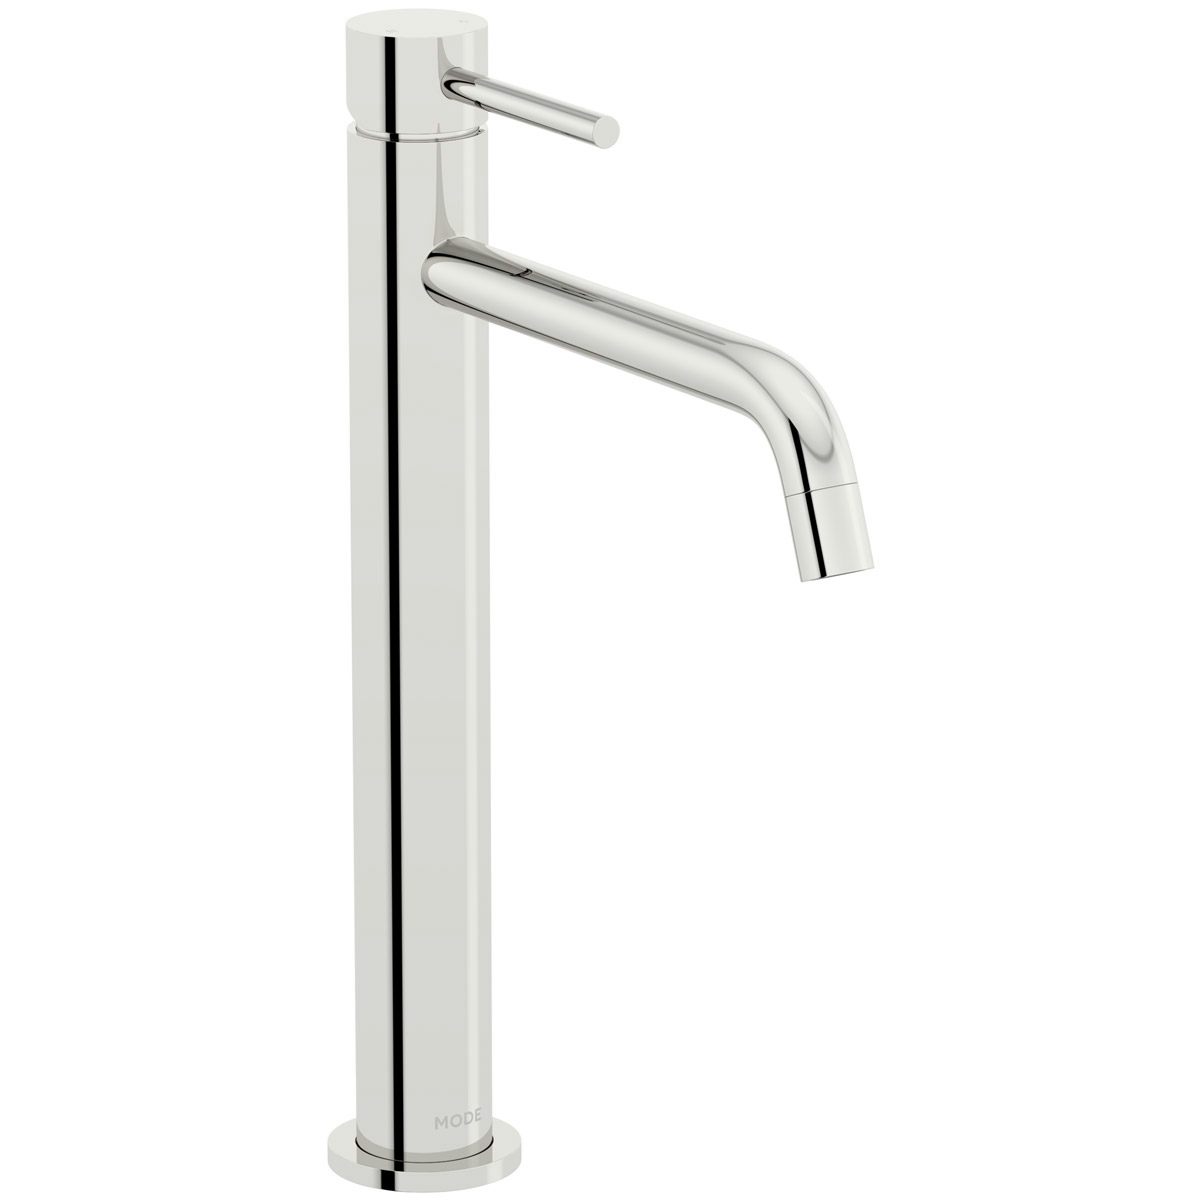 Mode Spencer round chrome high rise basin mixer tap with slotted waste